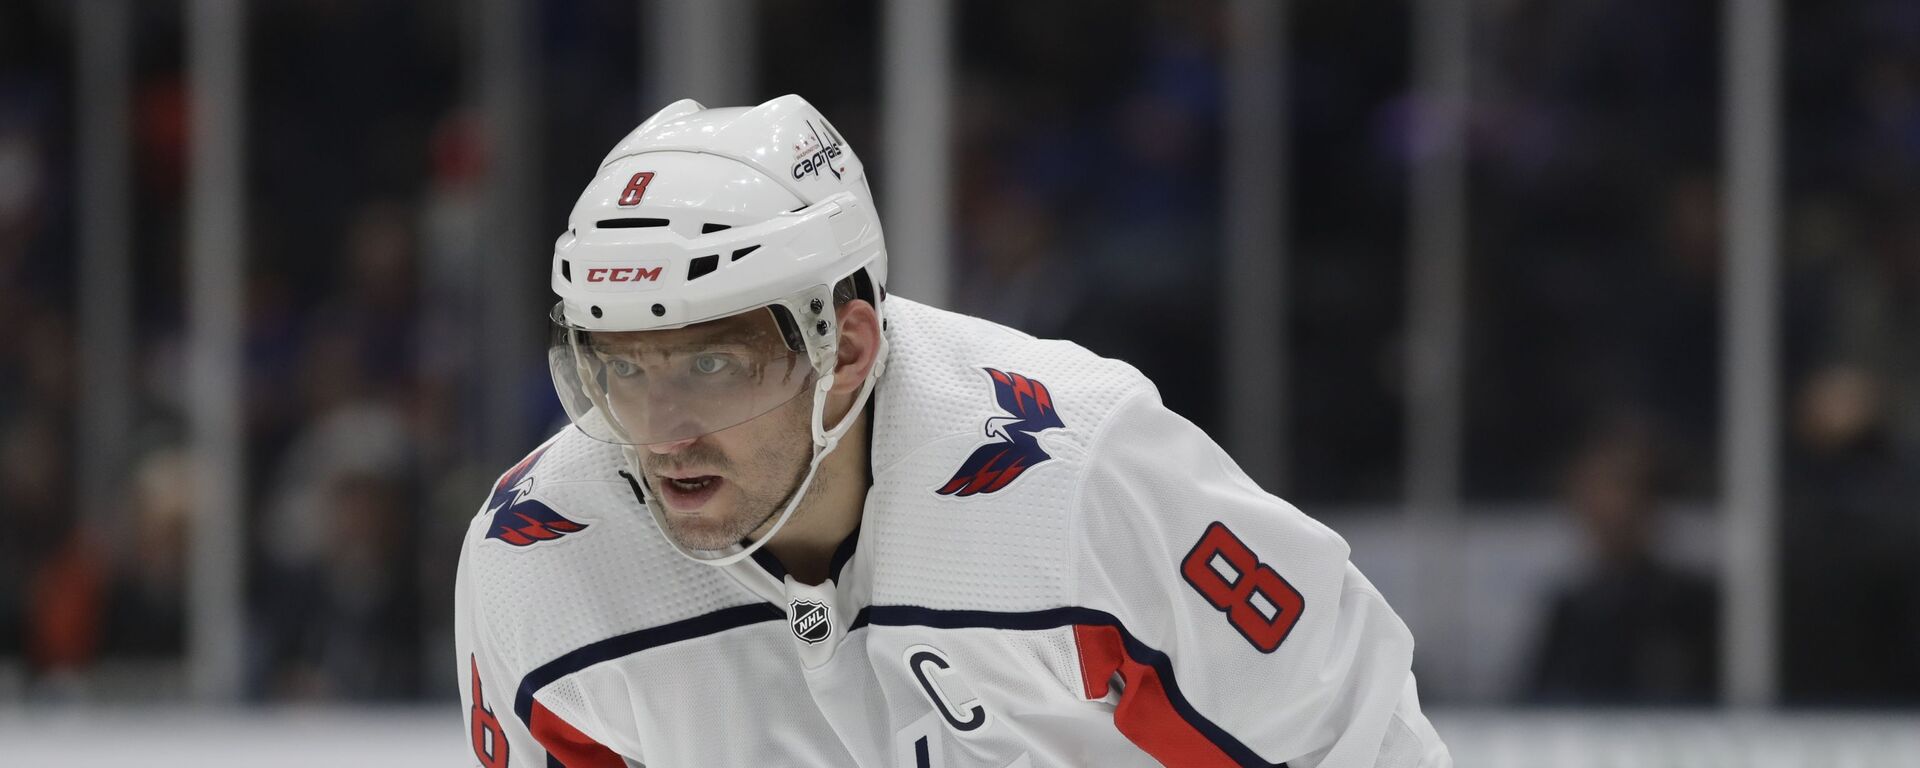 Washington Capitals' Alex Ovechkin (8) during the third period of an NHL hockey game against the New York Islanders Saturday, Jan. 18, 2020, in Uniondale, N.Y. The Capitals won 6-4.  - Sputnik International, 1920, 27.11.2021